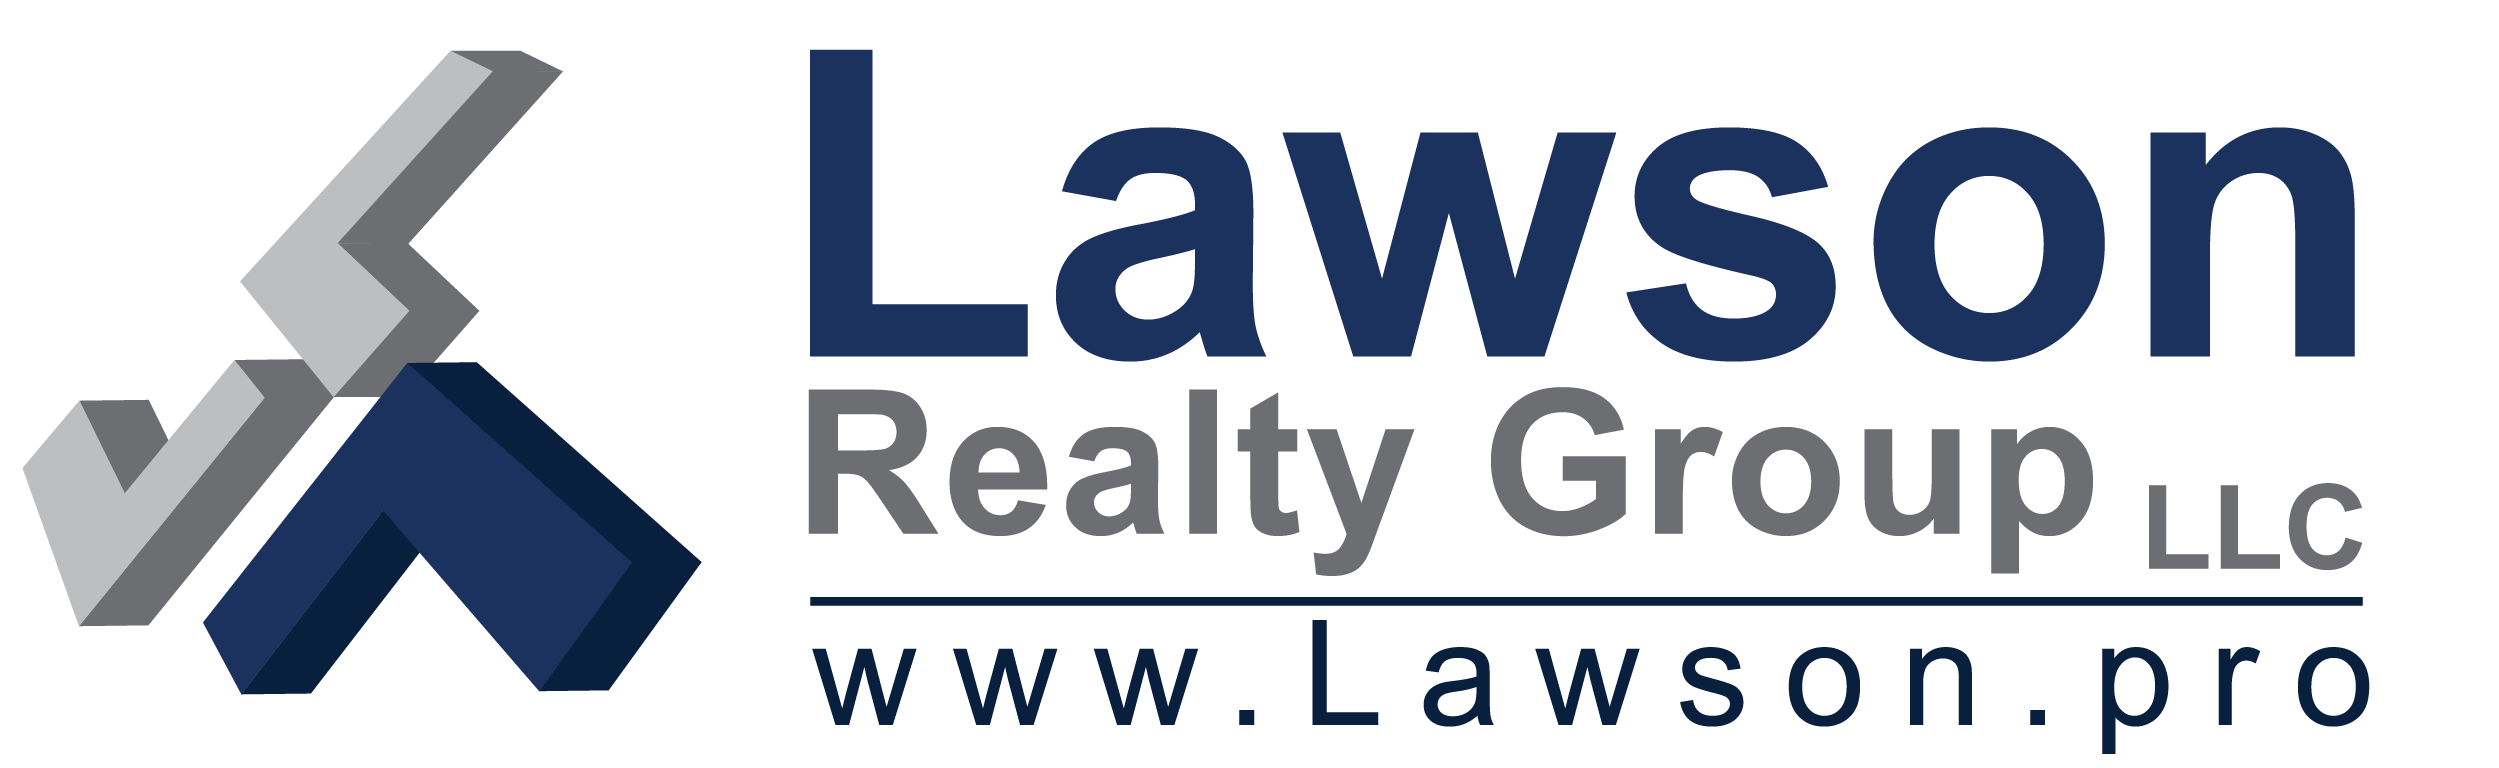 Lawson Realty Group